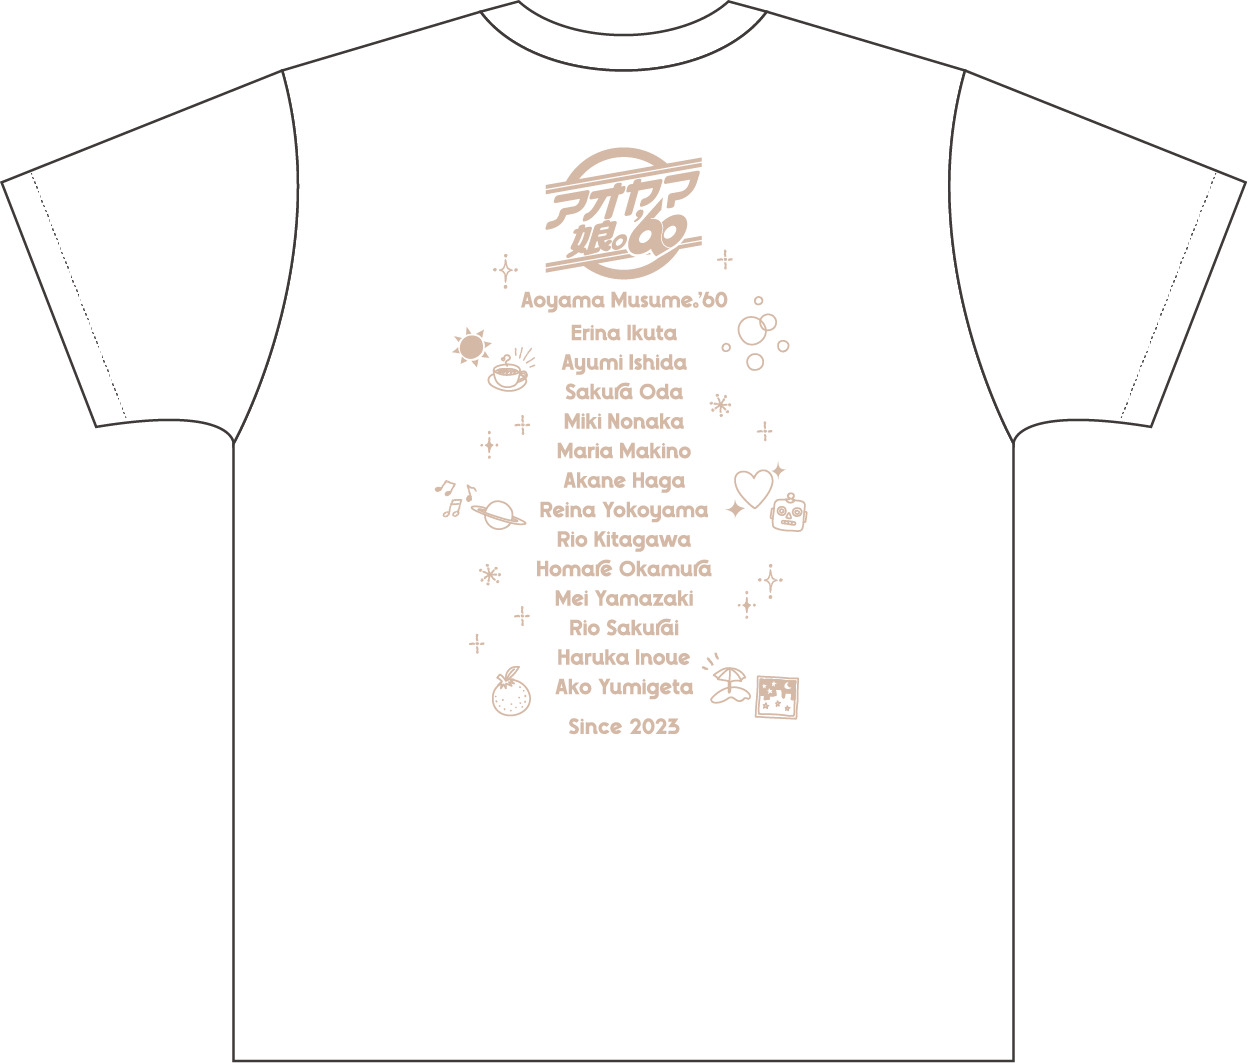 Tシャツ裏